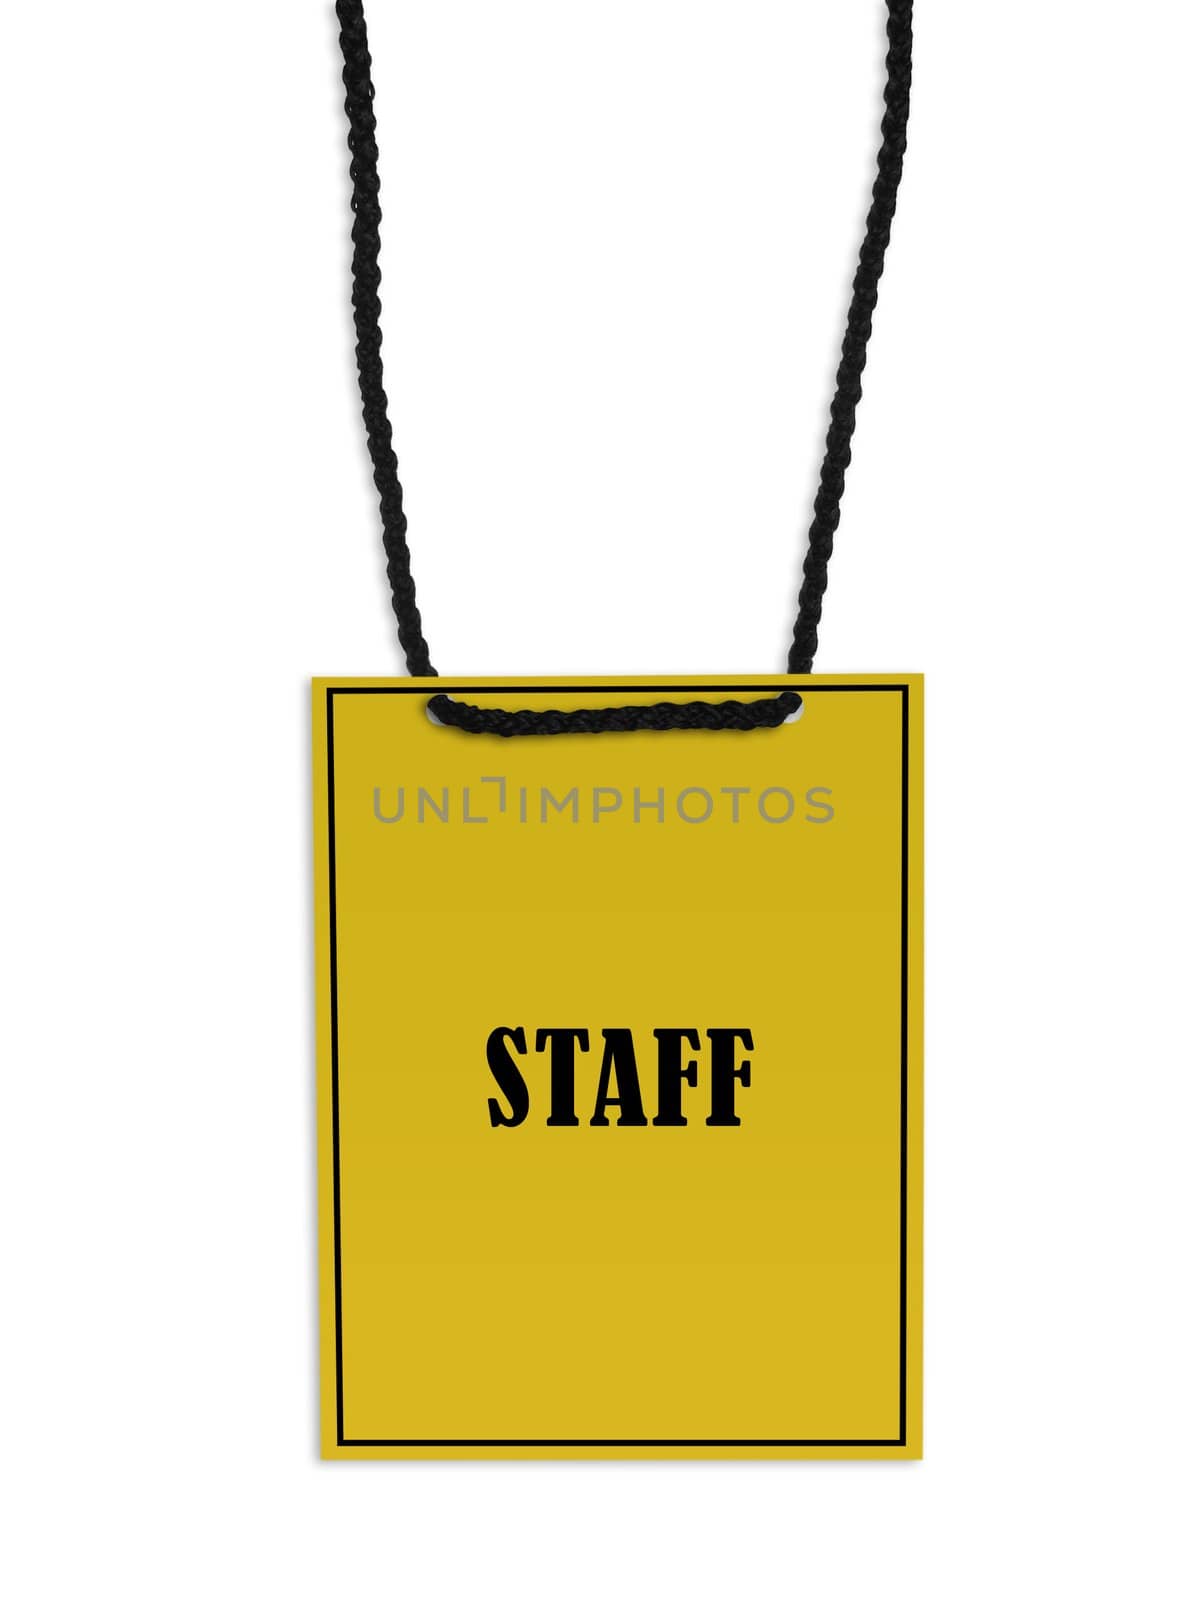 Staff backstage pass on white background.